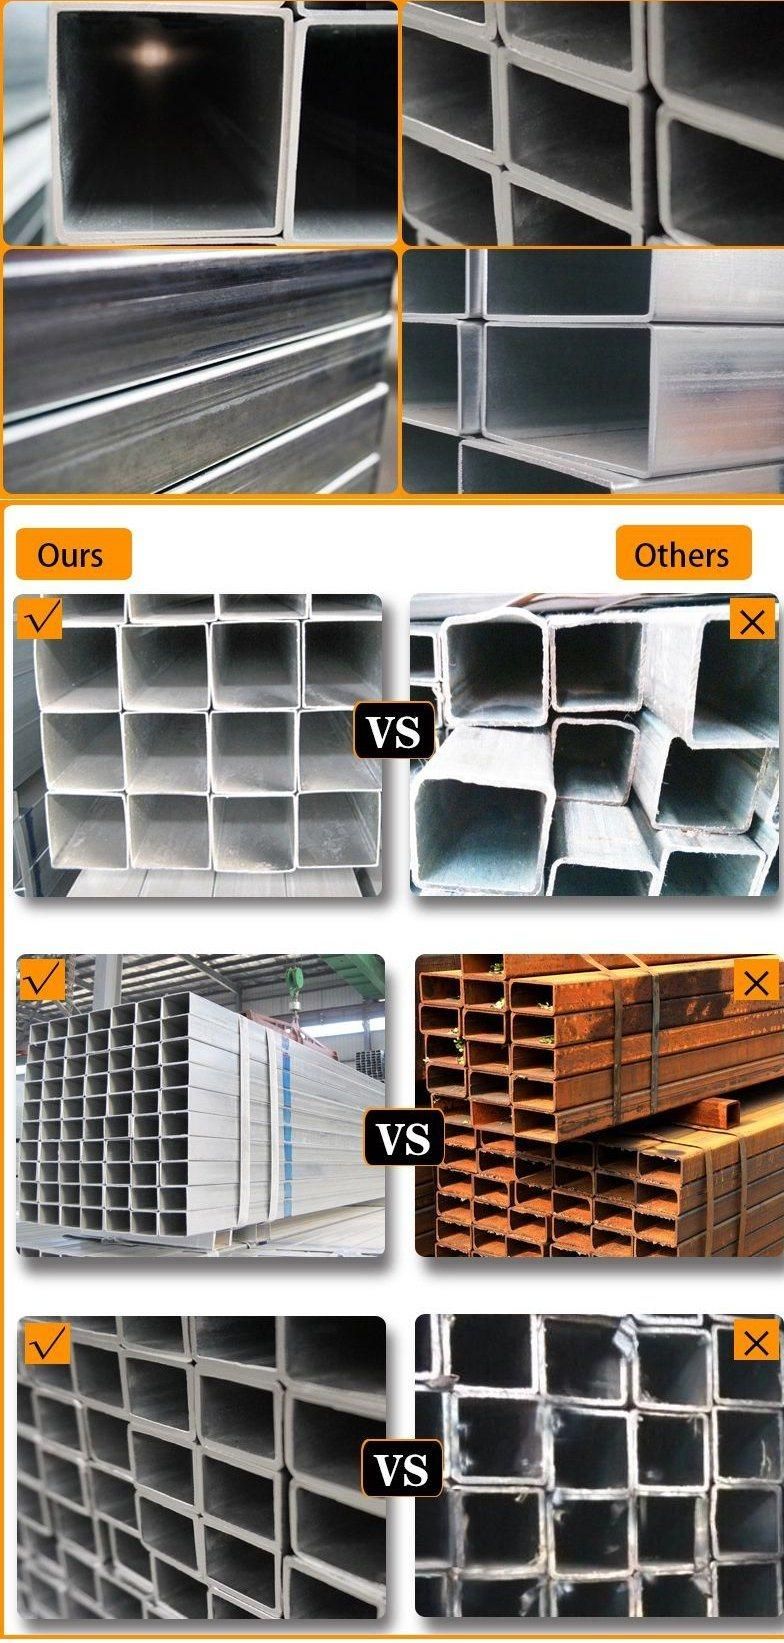 Hot Selling ASTM A53 A106 API 5L Q235 Seamless/ ERW Welded / Alloy Galvanized Square/Rectangular/Round Carbon Steel Pipe/Stainless Steel Pipe